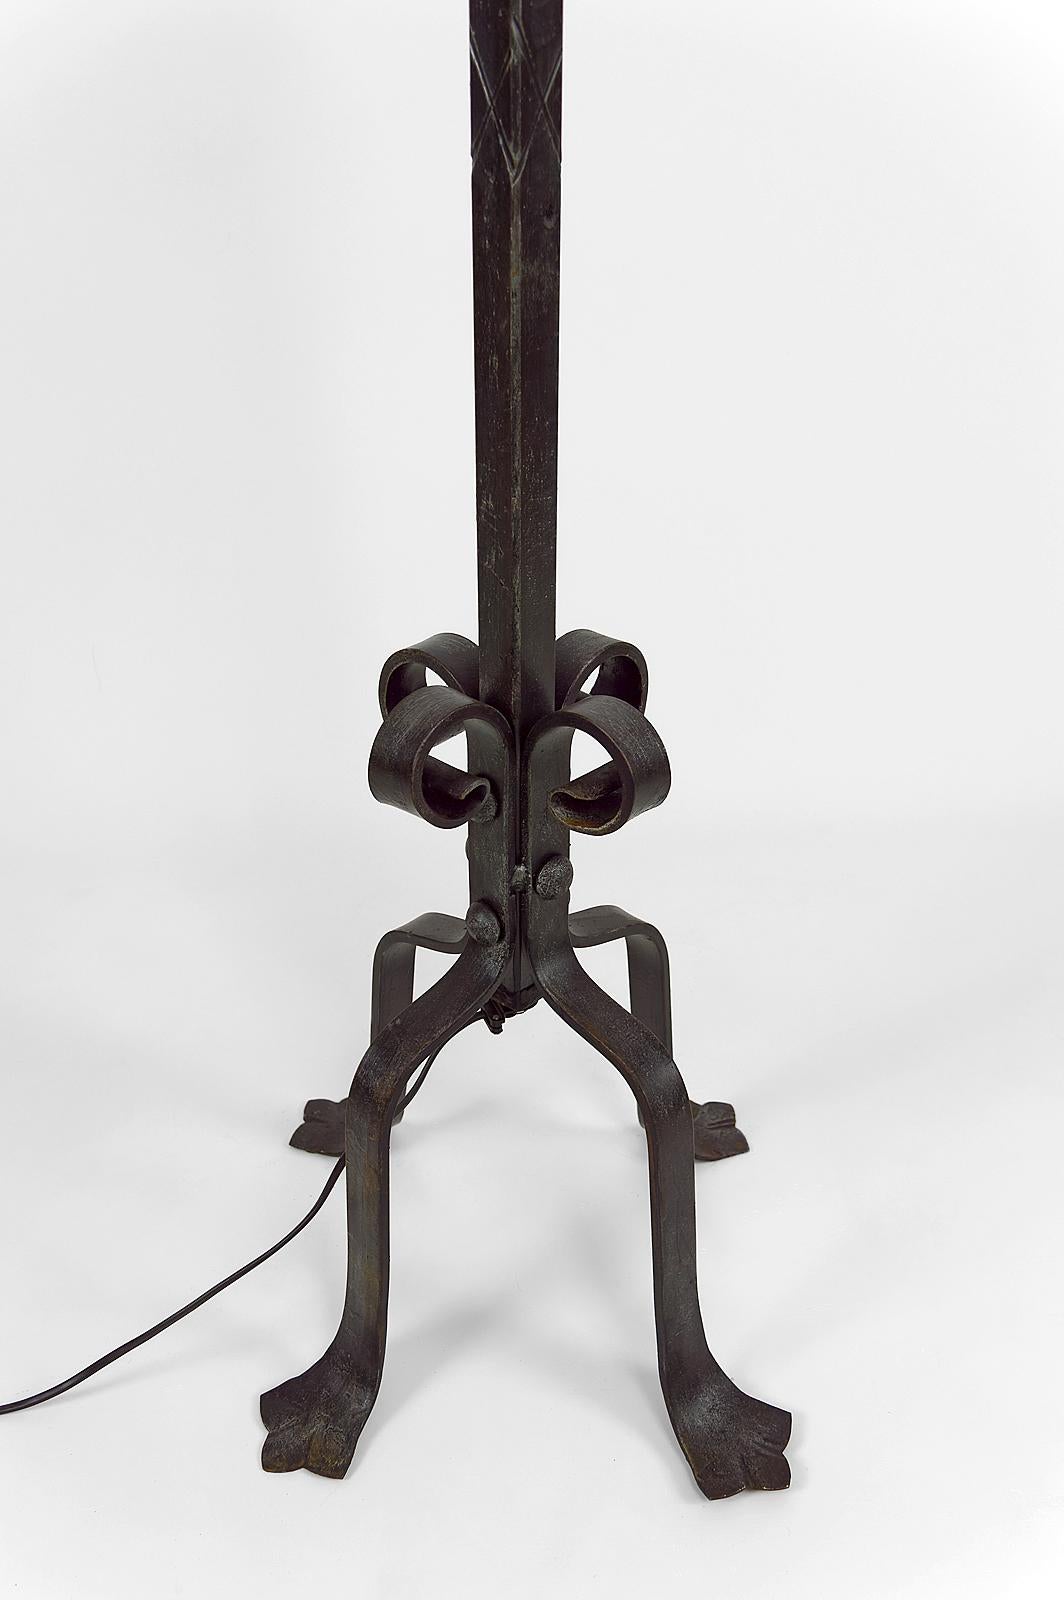 Rooster Floor Lamp in Wrought Iron by Jean Touret for Ateliers Marolles, 1950's For Sale 5